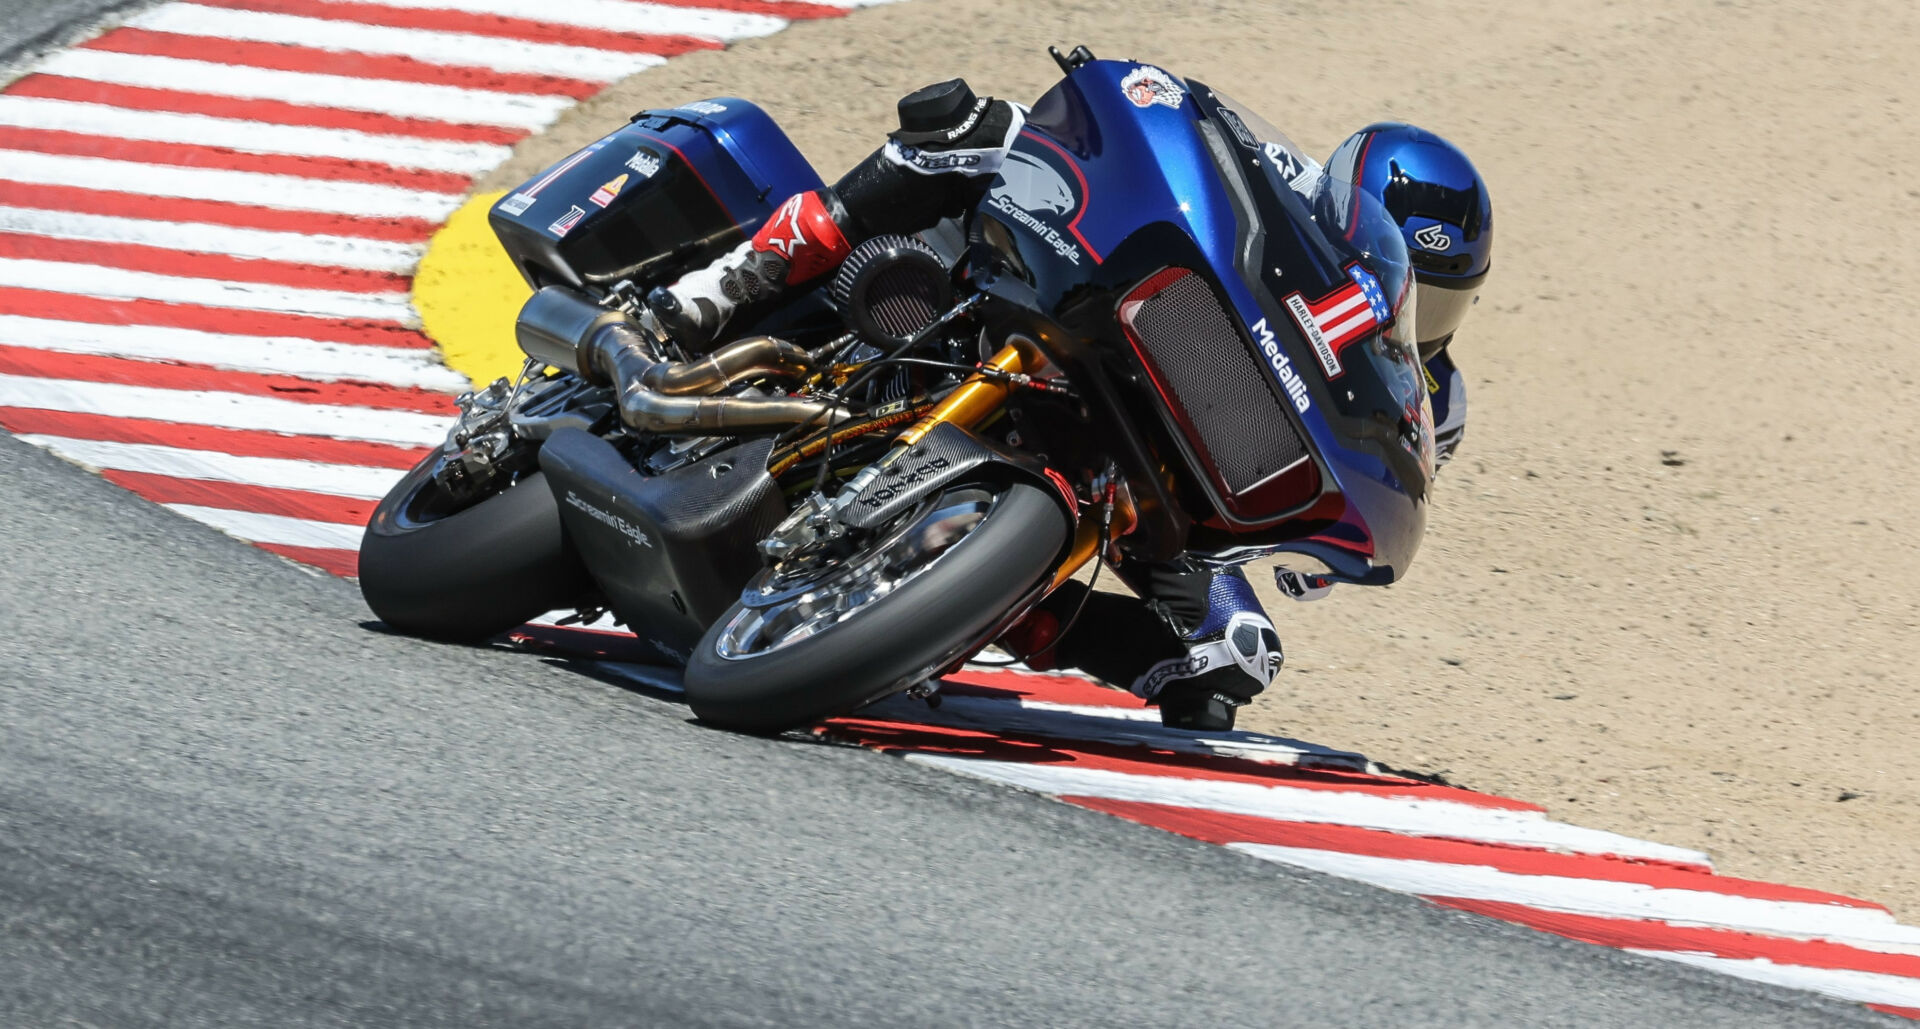 Kyle Wyman (1) won the King Of The Baggers race at Laguna Seca. Photo by Brian J. Nelson.